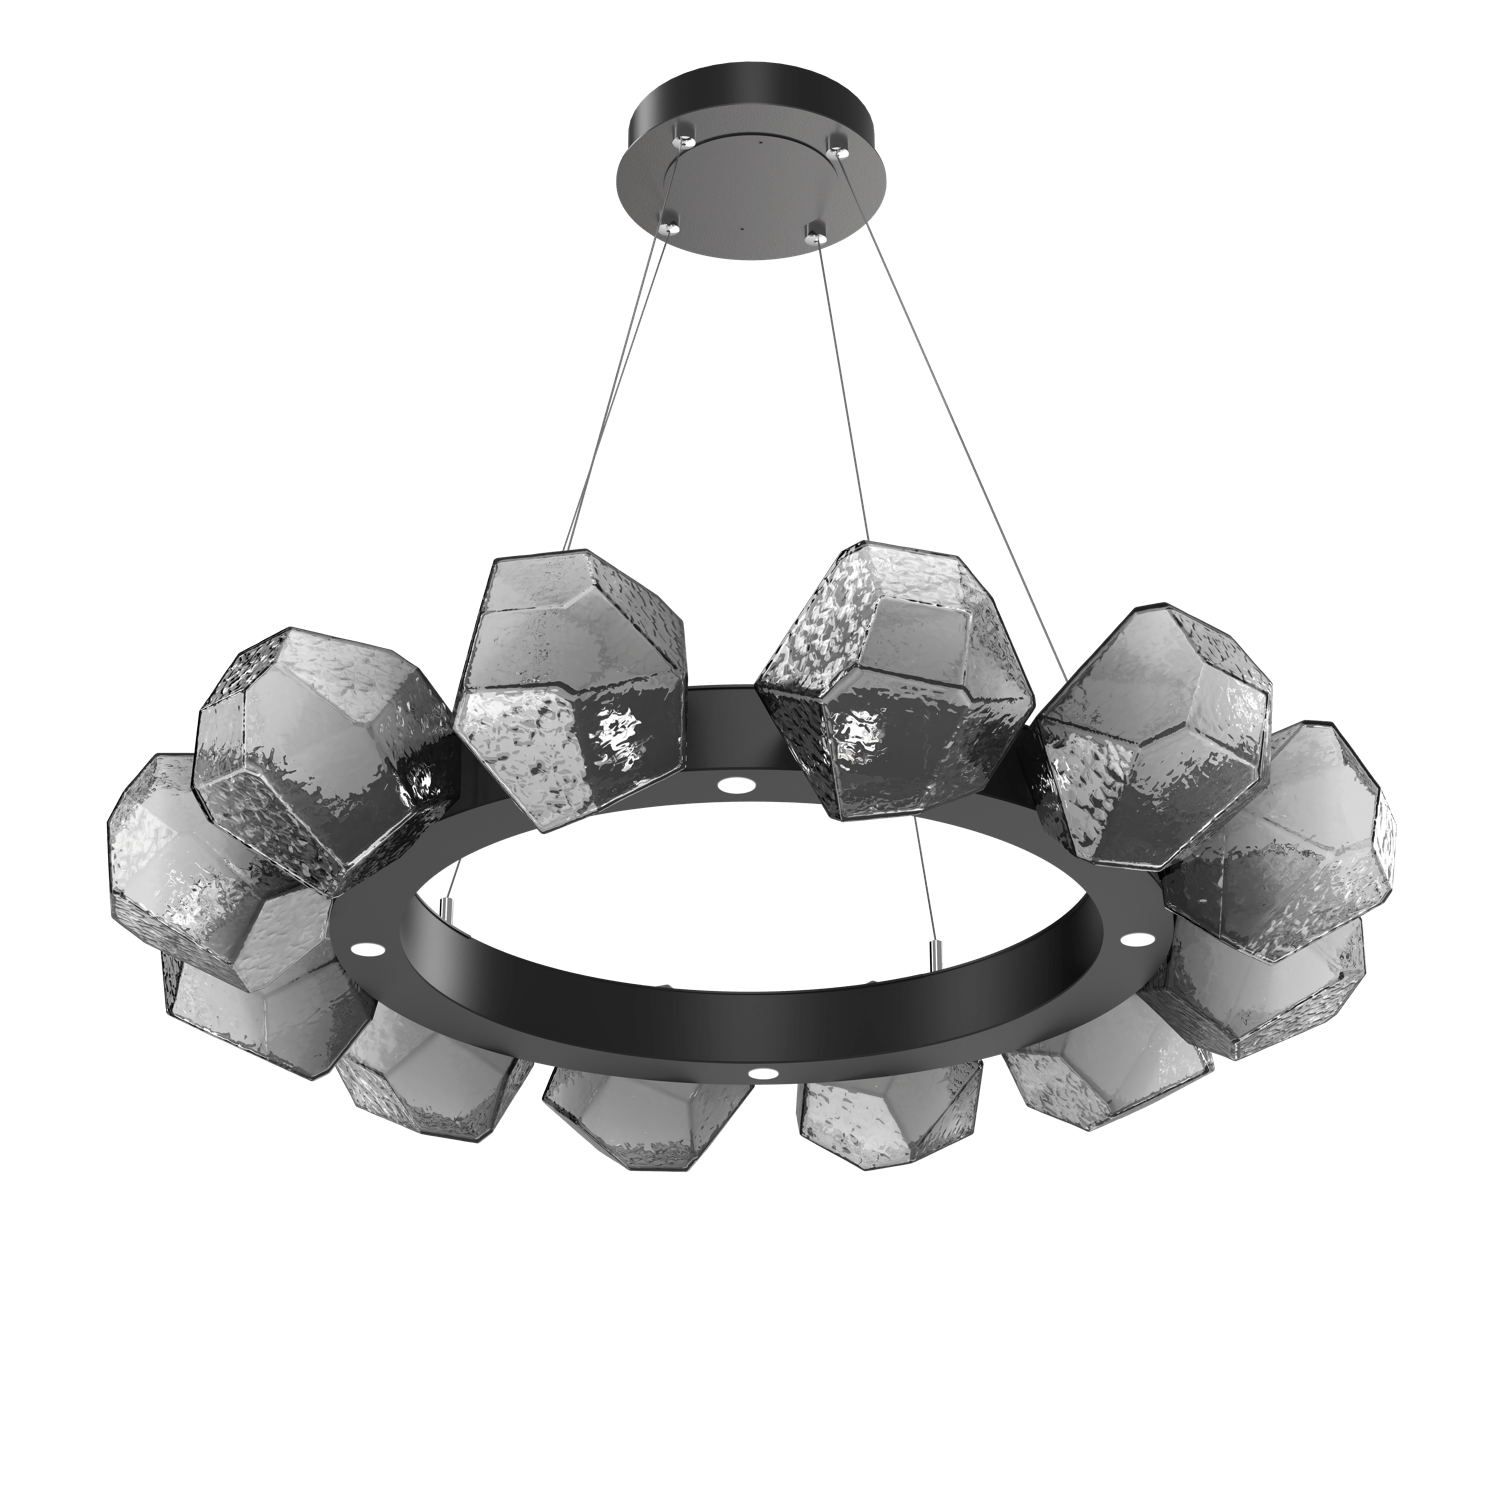 CHB0039-36-MB-S-Hammerton-Studio-Gem-36-inch-radial-ring-chandelier-with-matte-black-finish-and-smoke-blown-glass-shades-and-LED-lamping